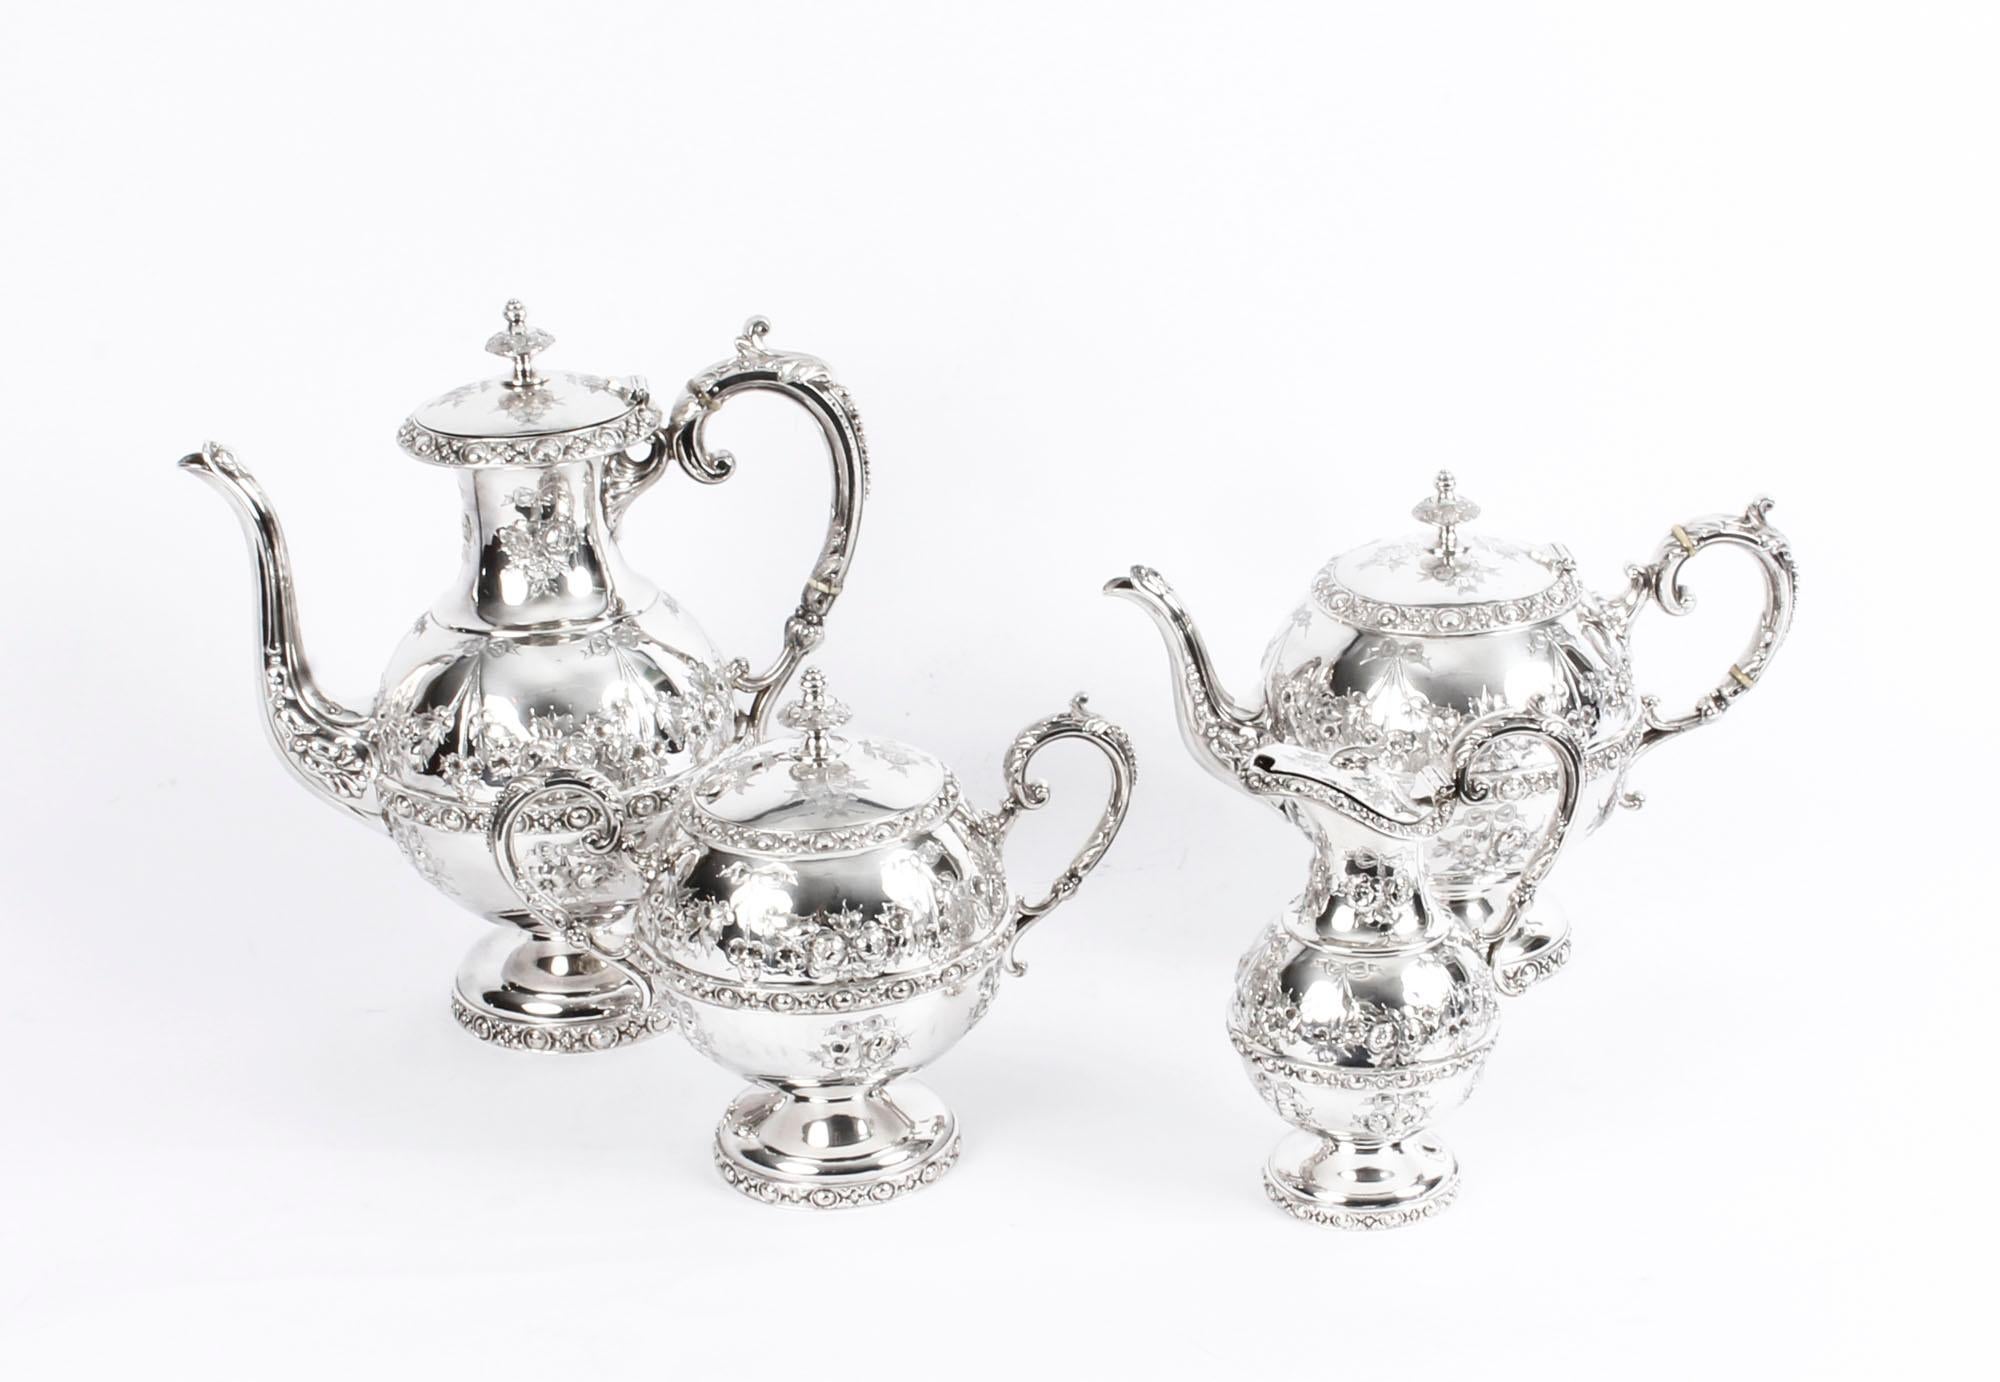 This is a very impressive antique English Victorian silver plated five-piece tea and coffee set by the renowned silversmiths, John Round & Son, Sheffield, circa 1880 in date.
 
This magnificent set comprises a wonderful coffee pot, teapot, sugar